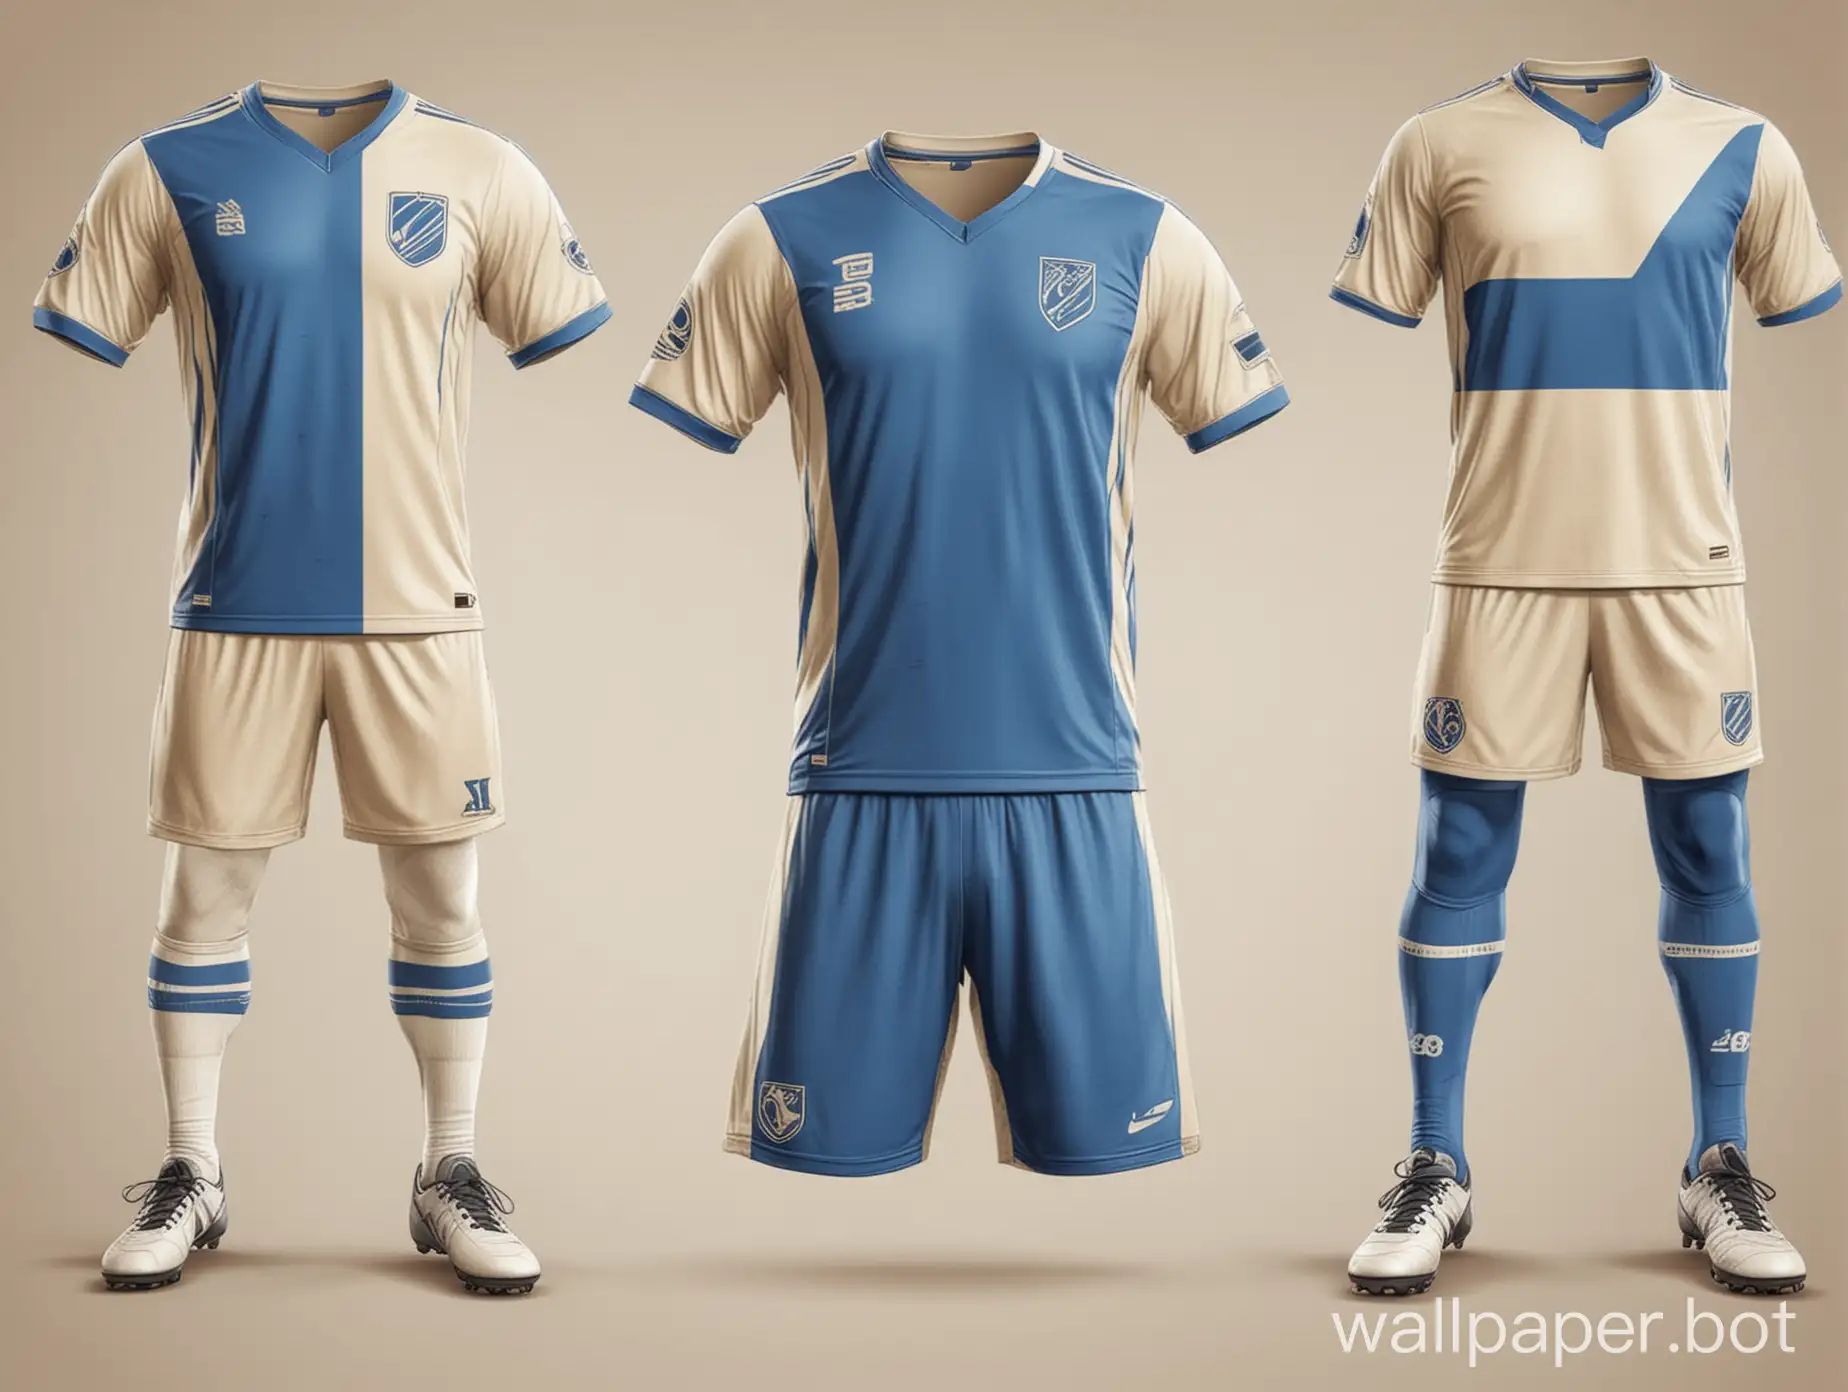 BlueBeige-Soccer-Uniform-with-Wide-Diagonal-Stripes-on-White-Background-Sketch-Concept